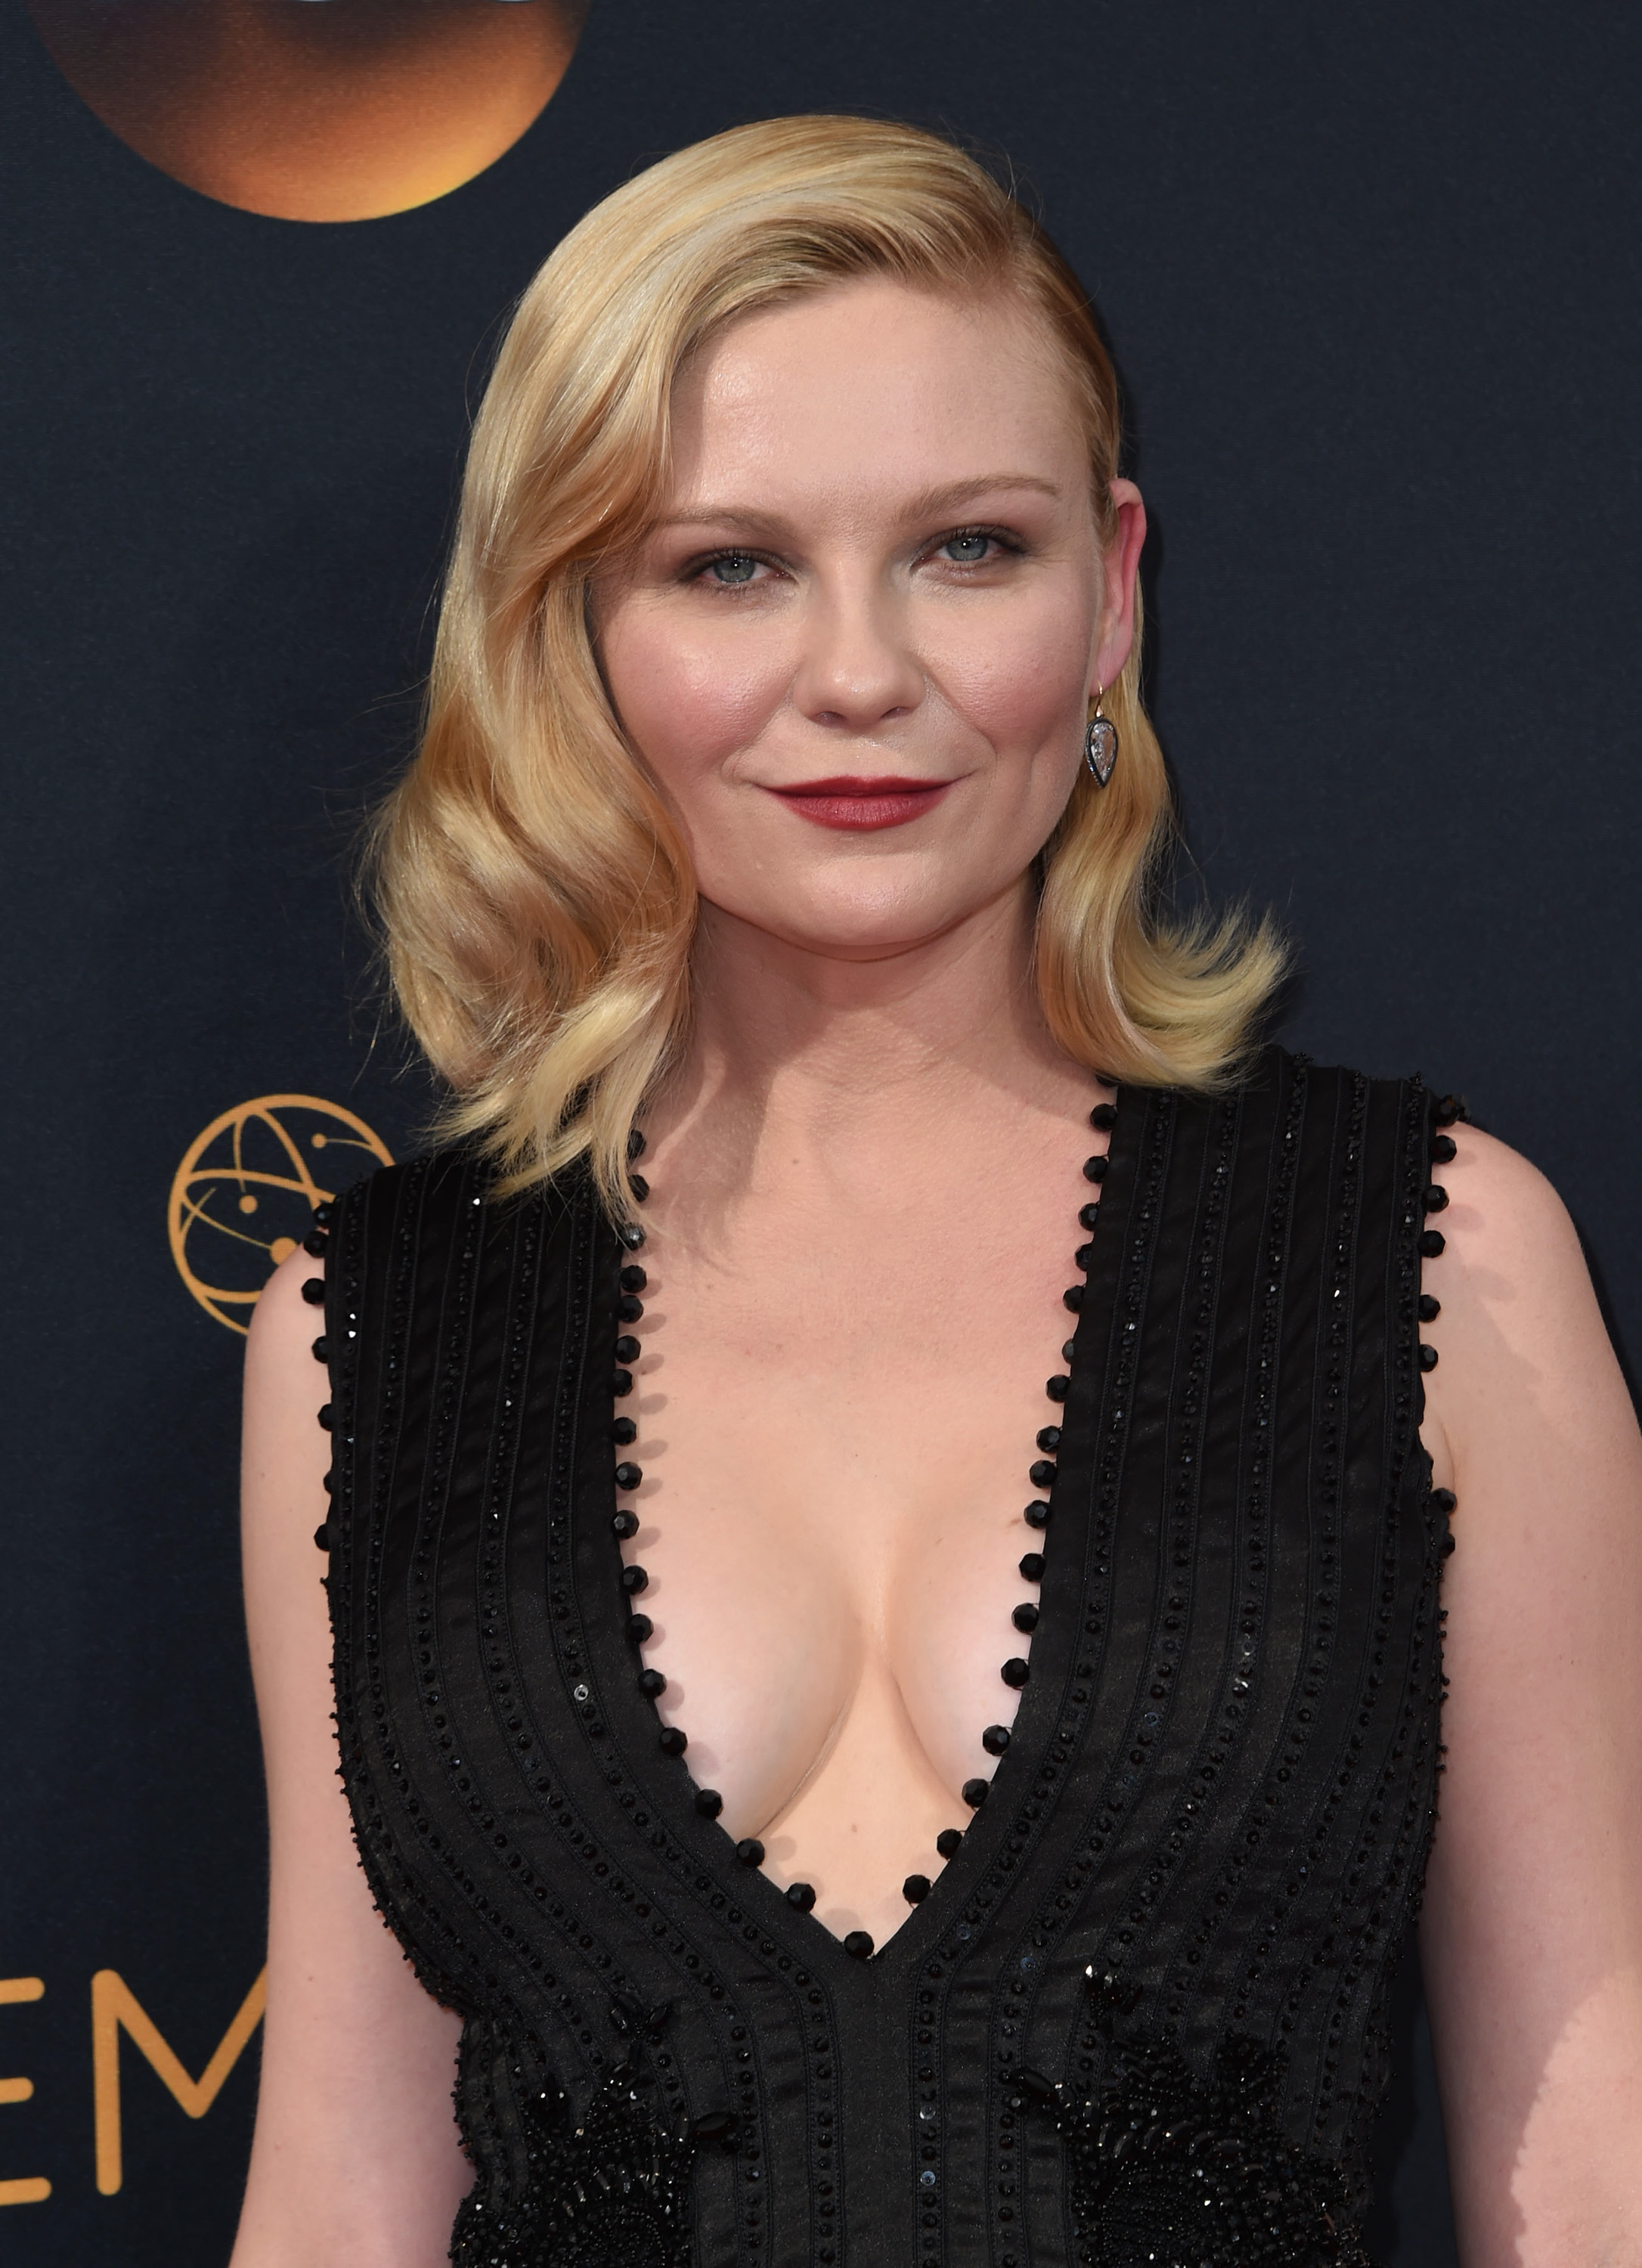 Emmy Awards Scrolldown Carpet: Kirsten Dunst in Givenchy